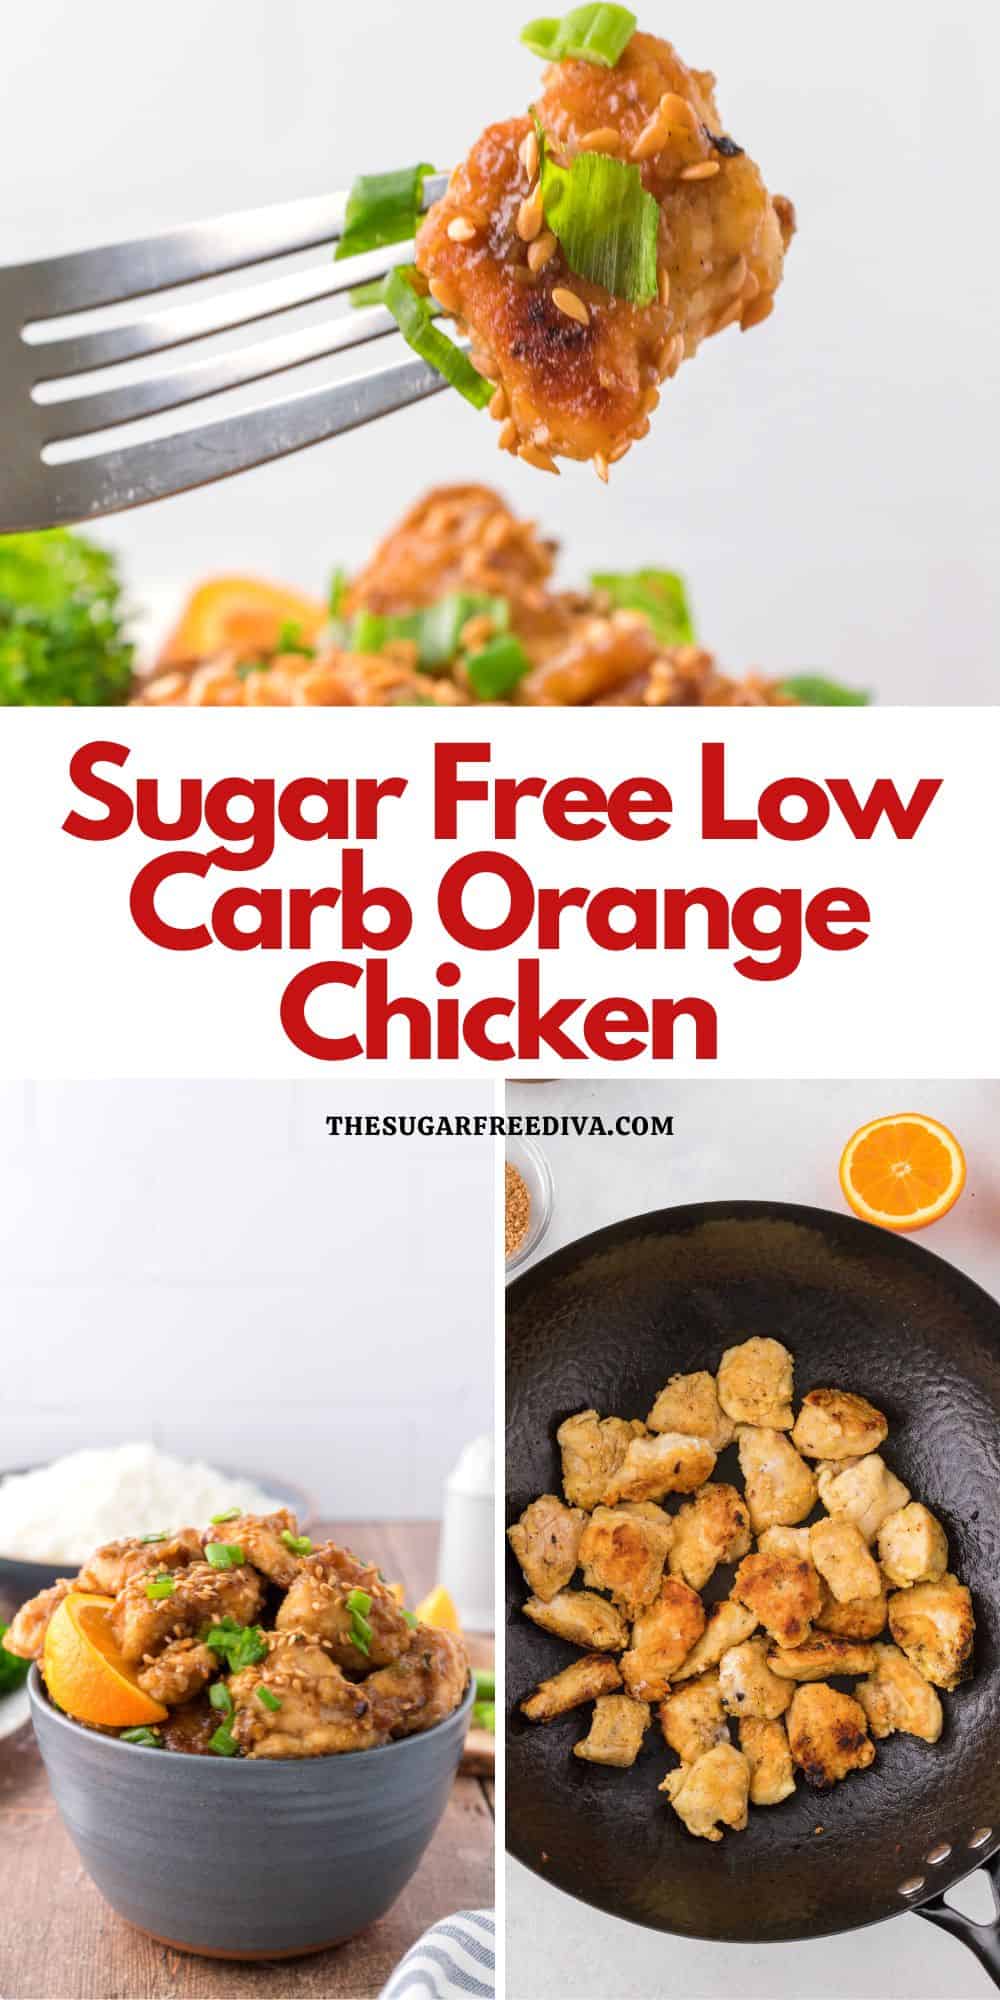 Sugar Free Low Carb Orange Chicken , This delicious recipe for Sugar Free Low Carb Orange Chicken is so good that it tastes just like the real restaurant version. No added sugar, gluten free, low carb.